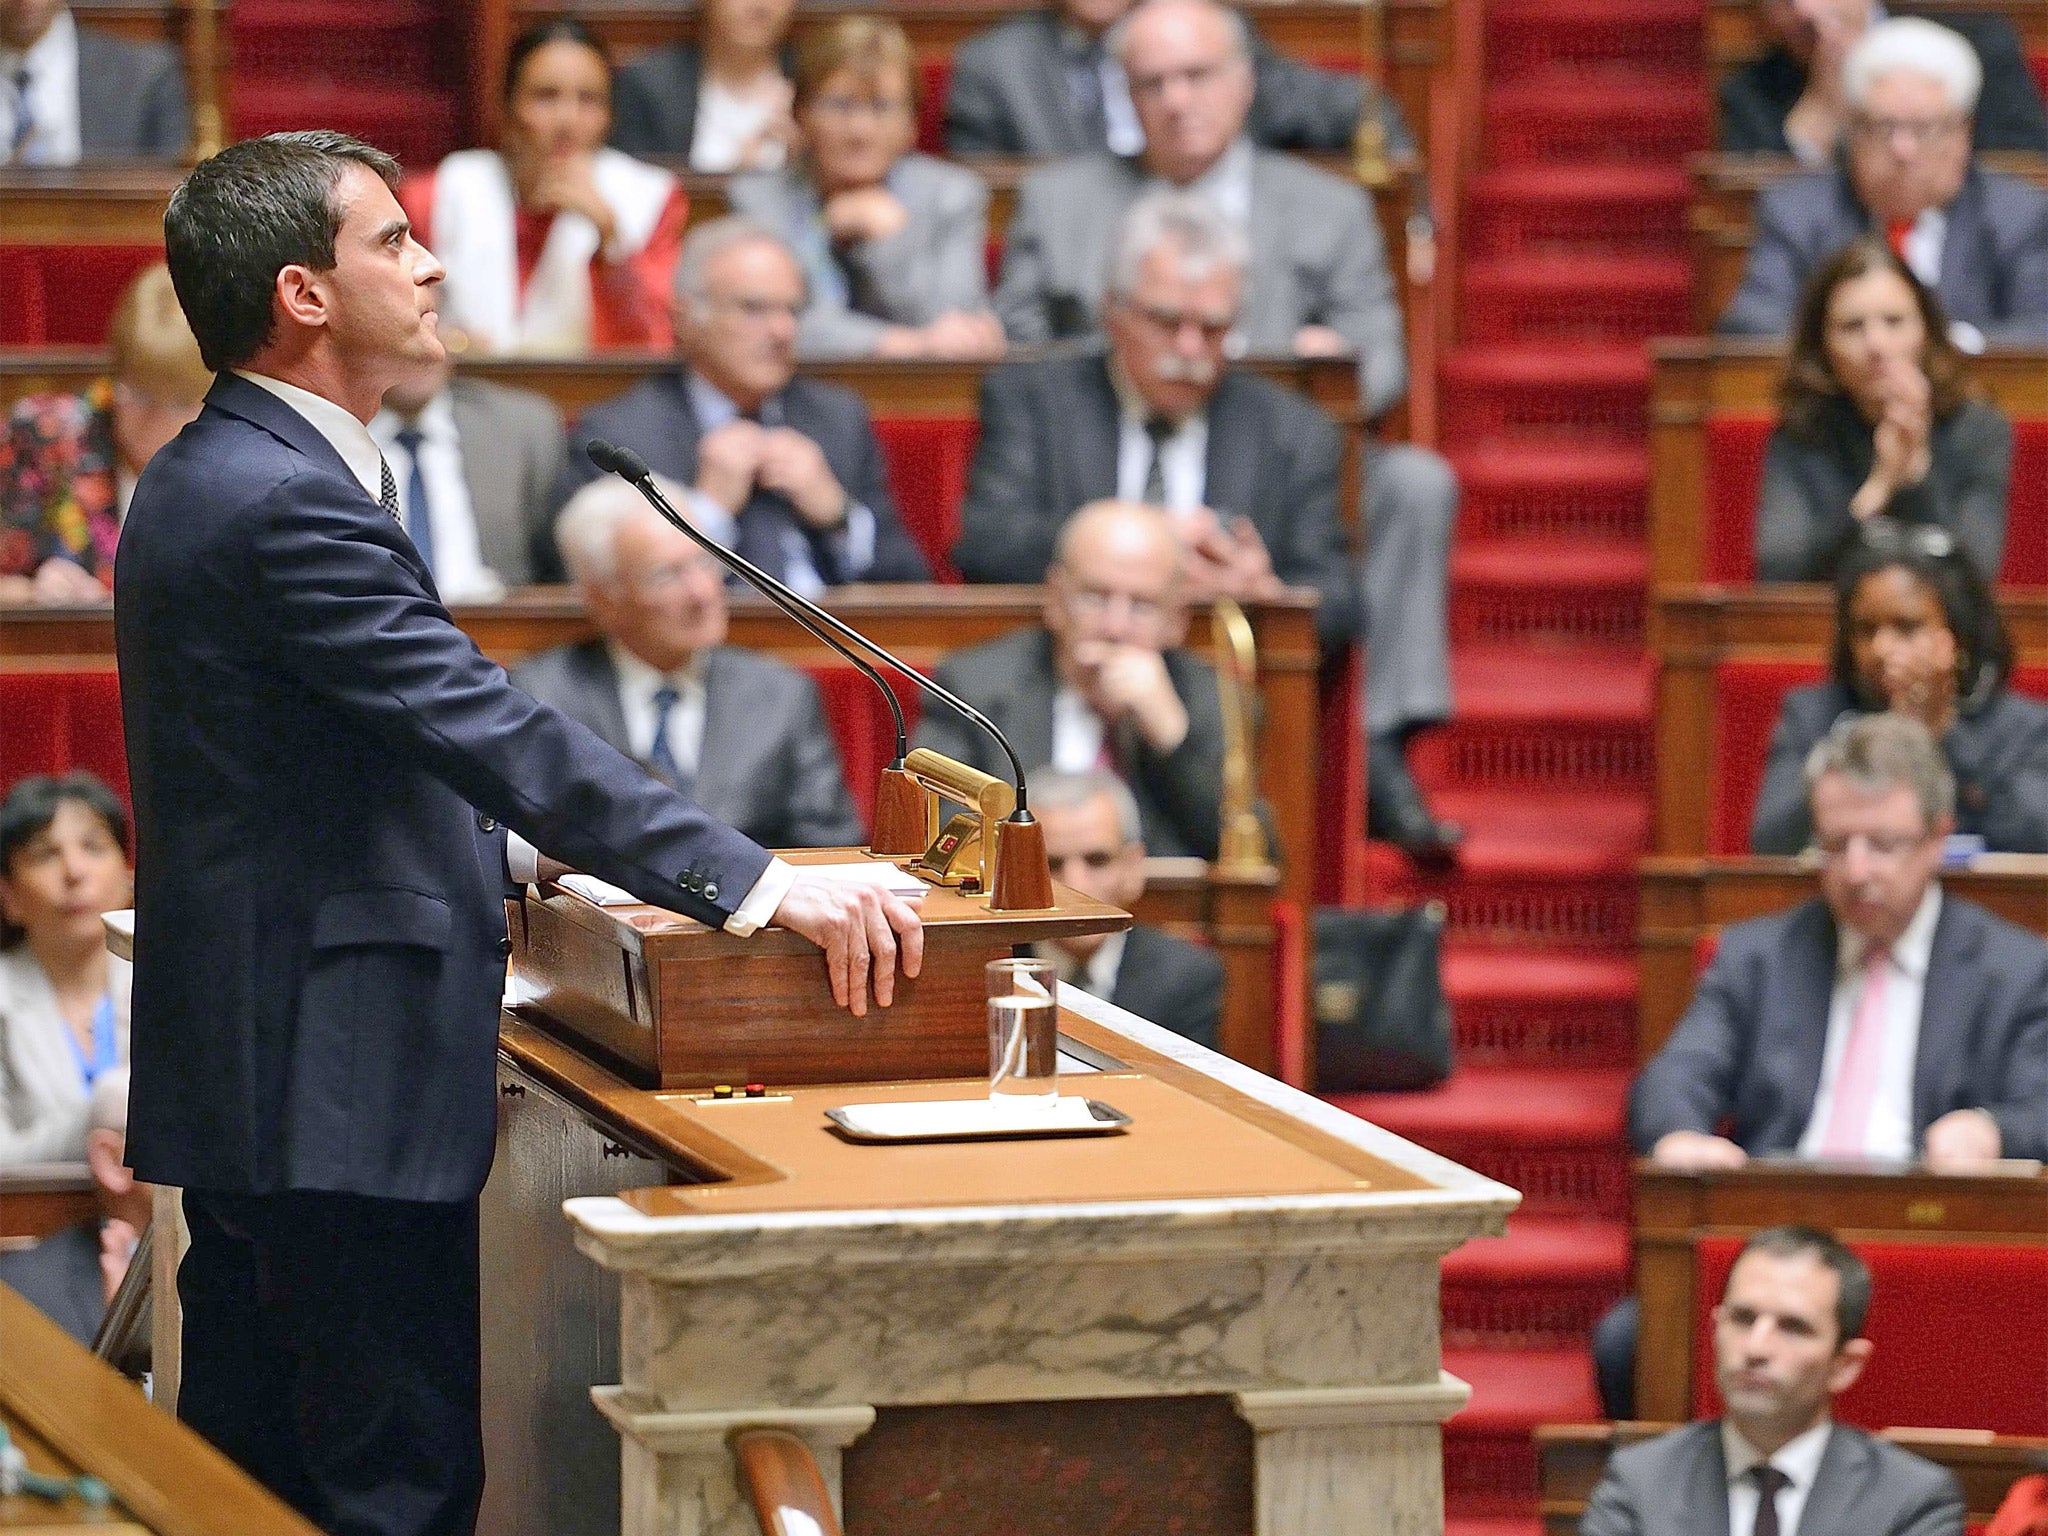 Mr Valls said austerity was ‘counter-productive’